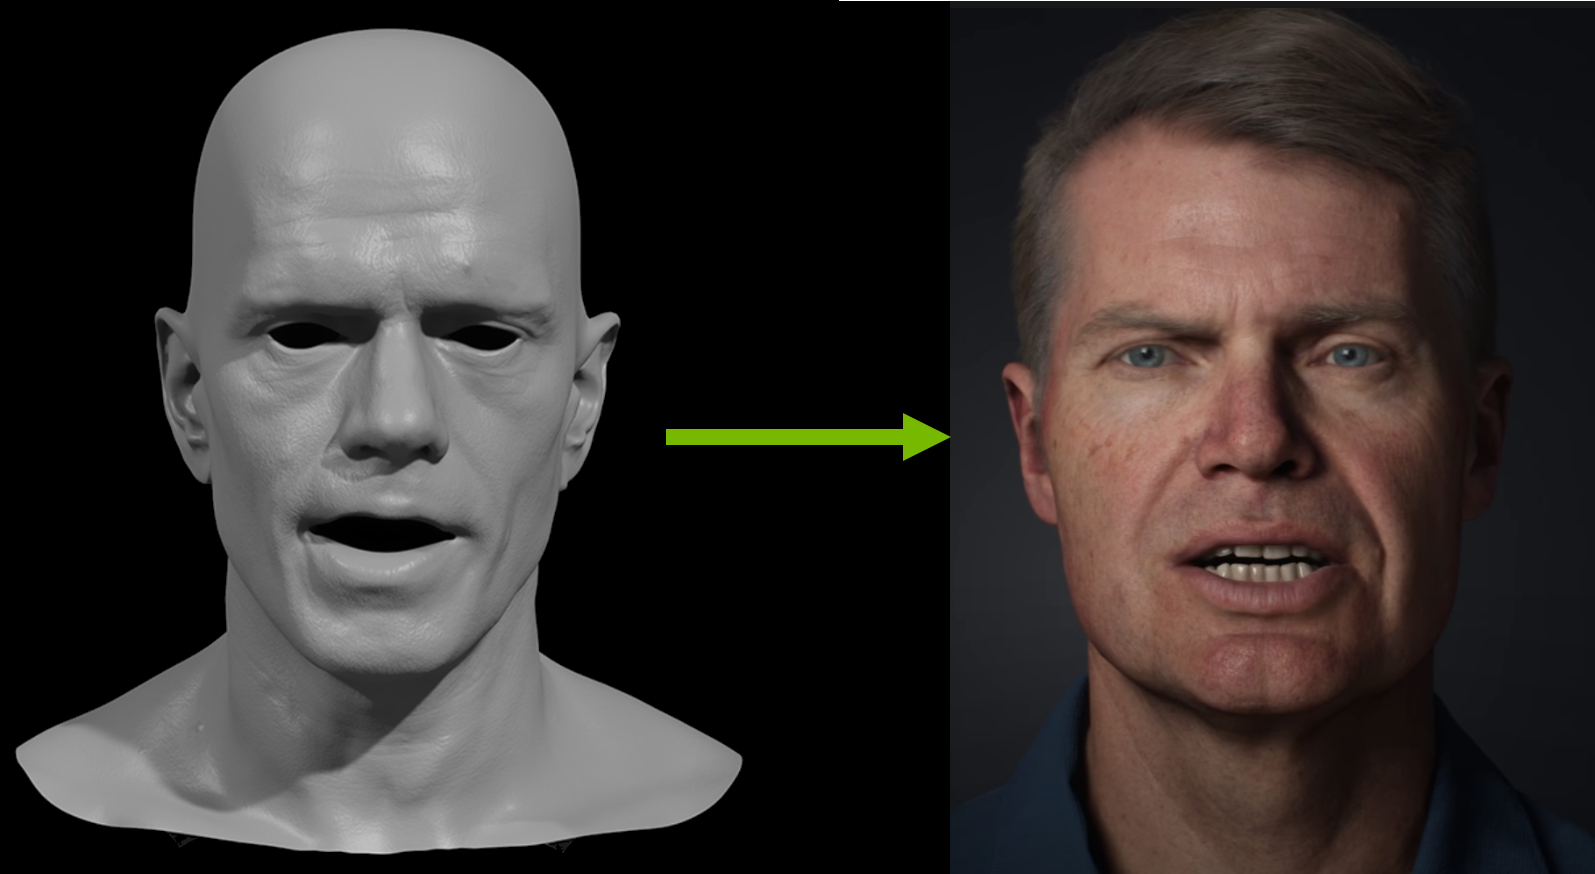 ../../_images/connect_ue4_facial_mark_to_meta.png